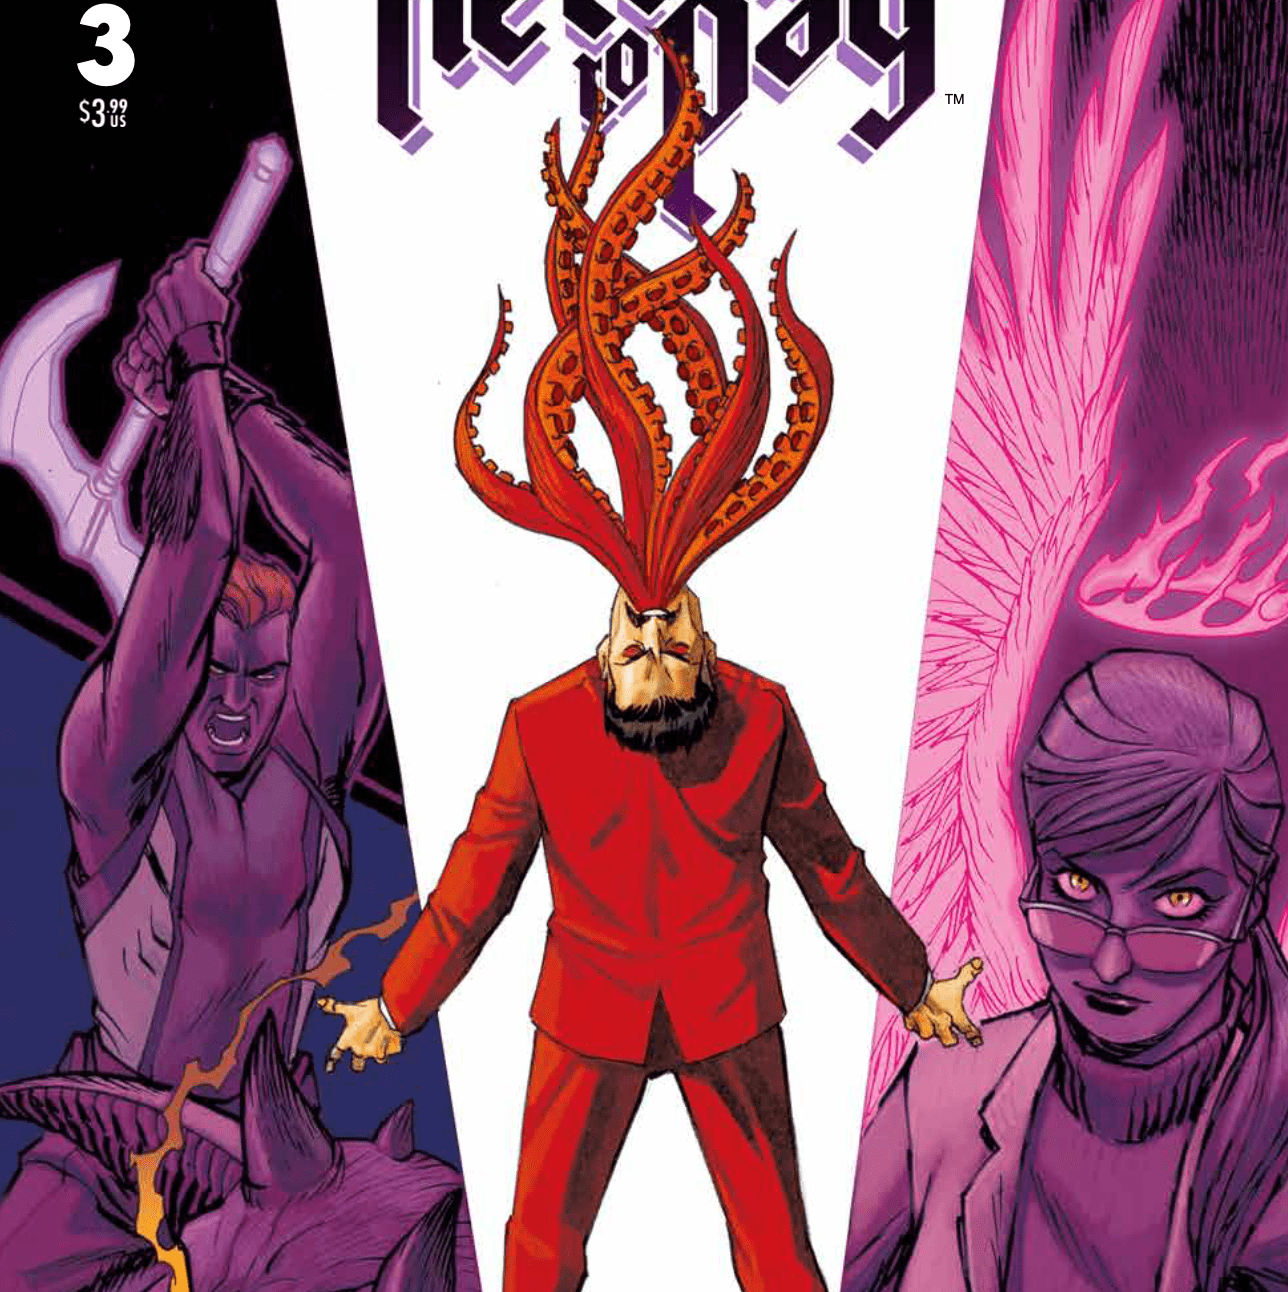 ‘Hell to Pay’ #3 reveals the villain's terrible plot